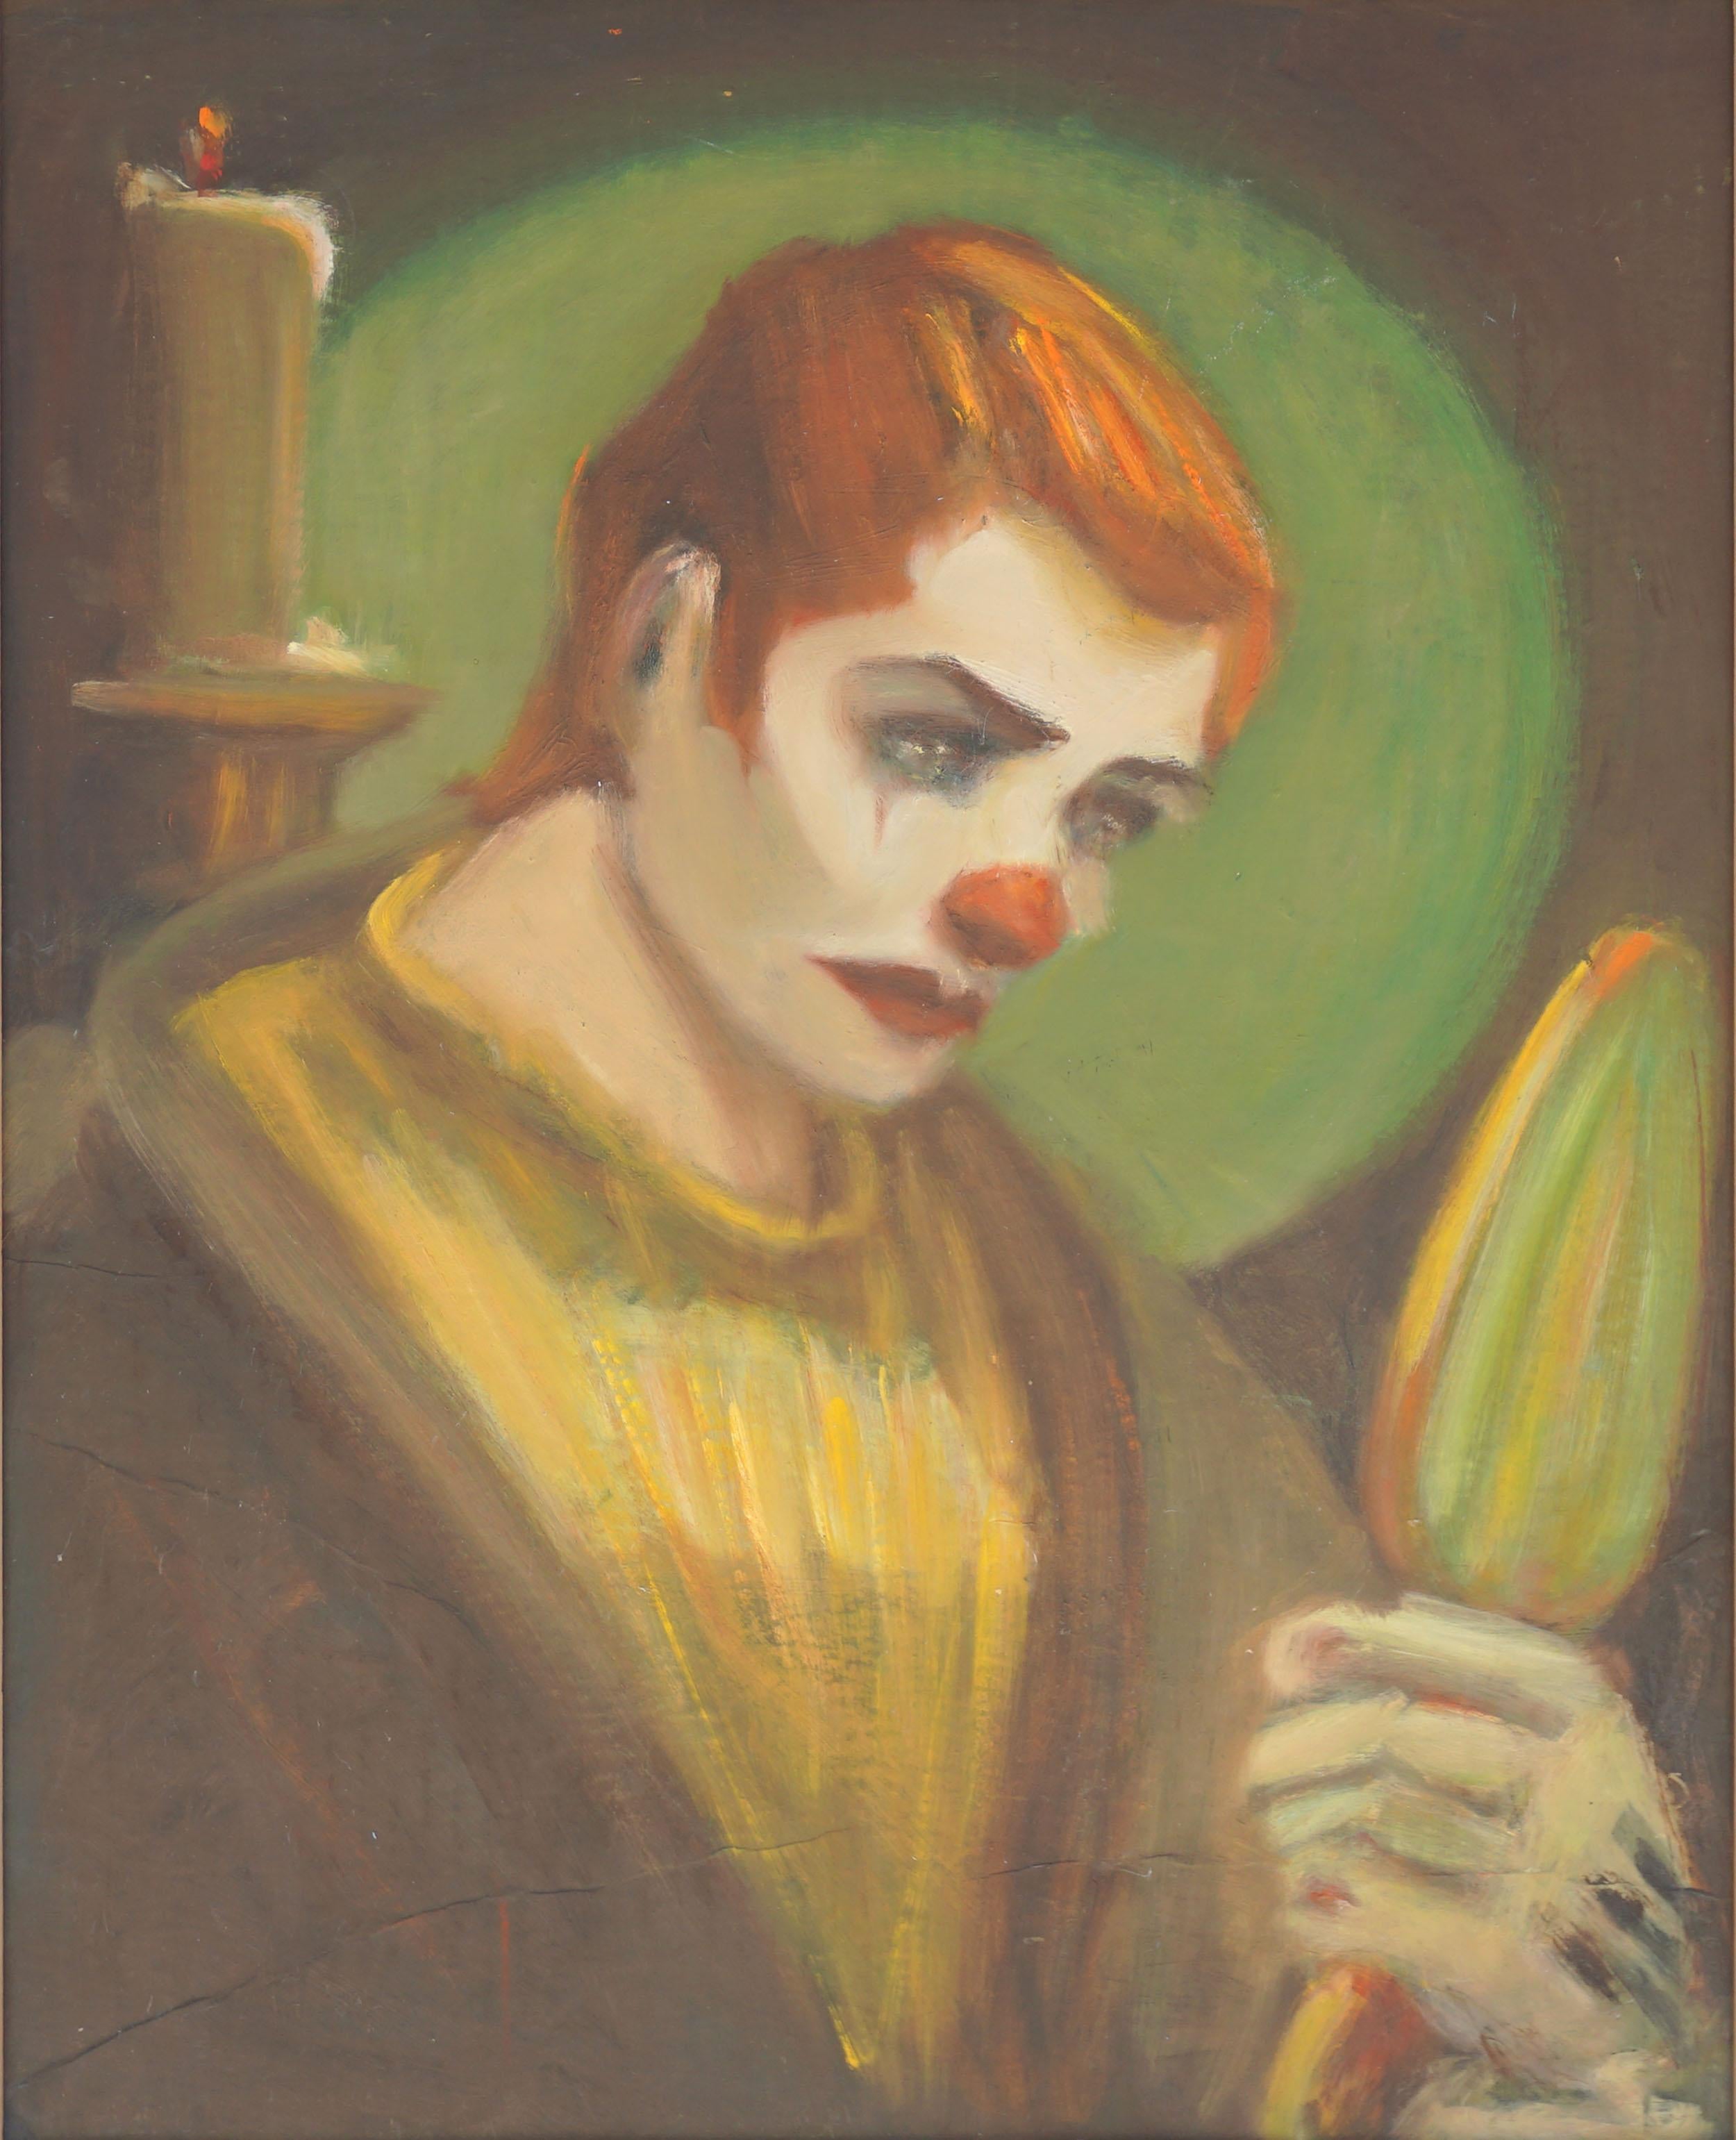 Mid Century Pulp Art - Sad Clown Portrait with Green, Yellow, & Red  - Painting by Unknown